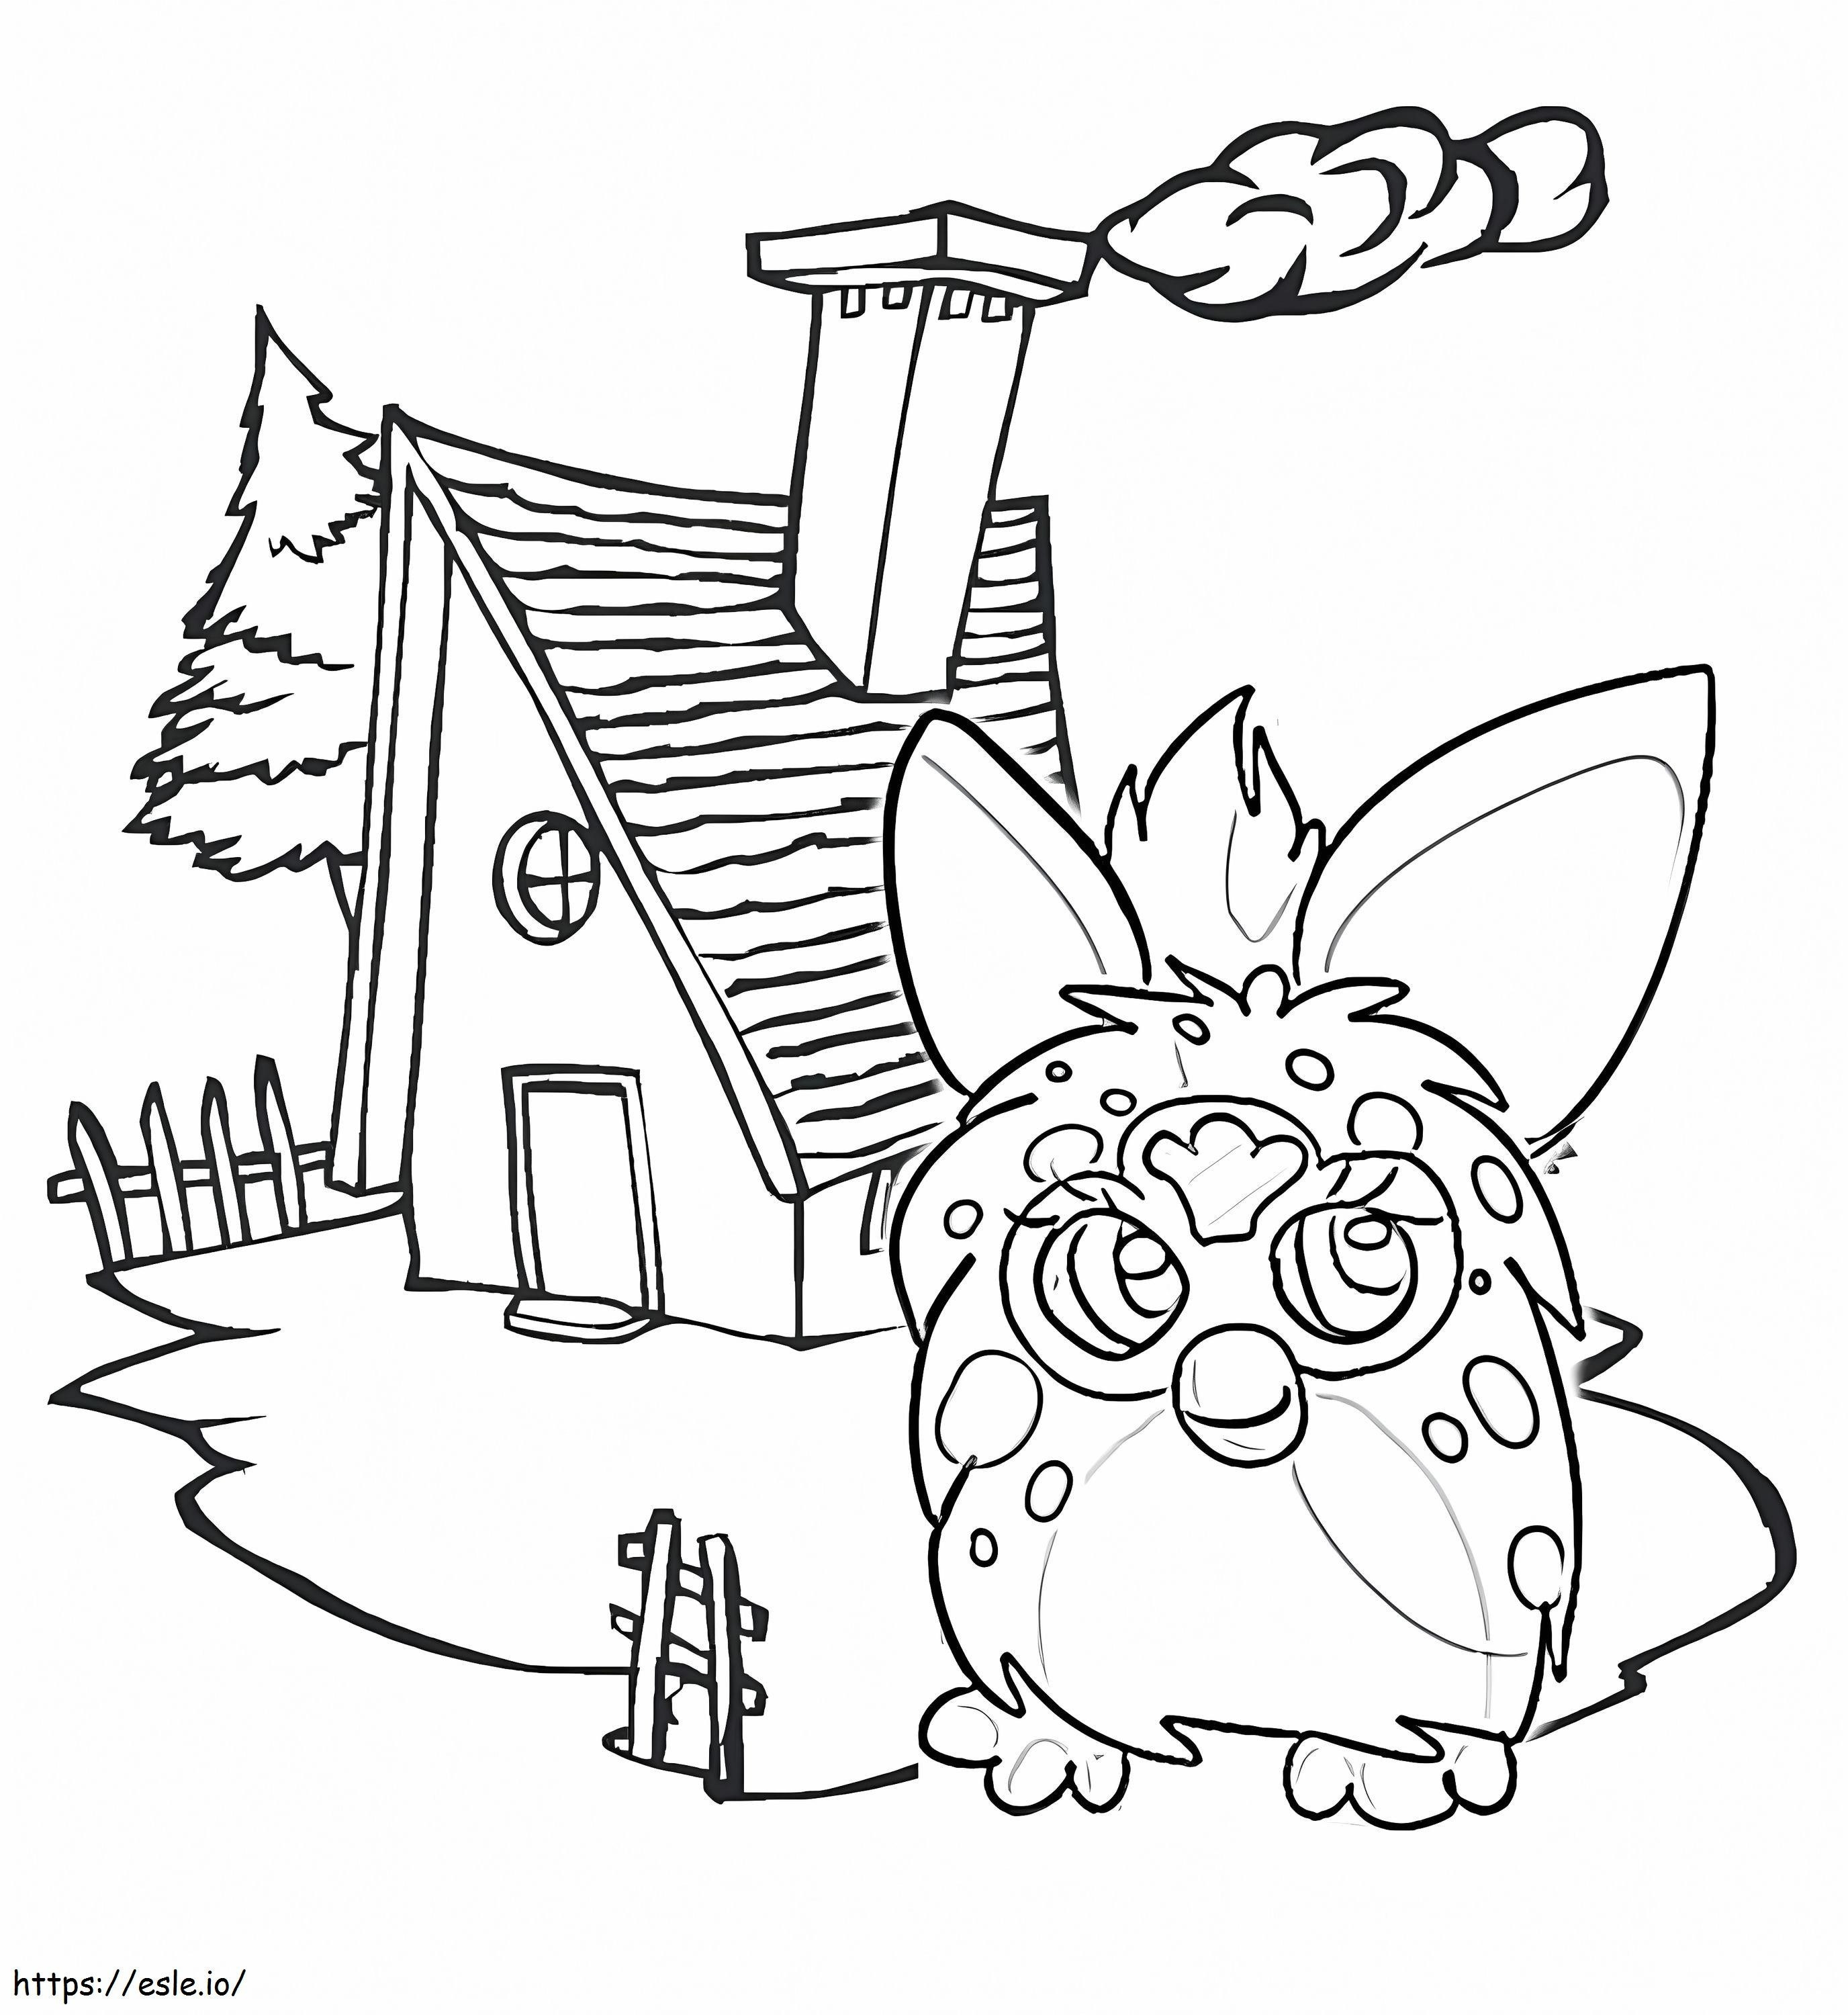 Furby And House coloring page